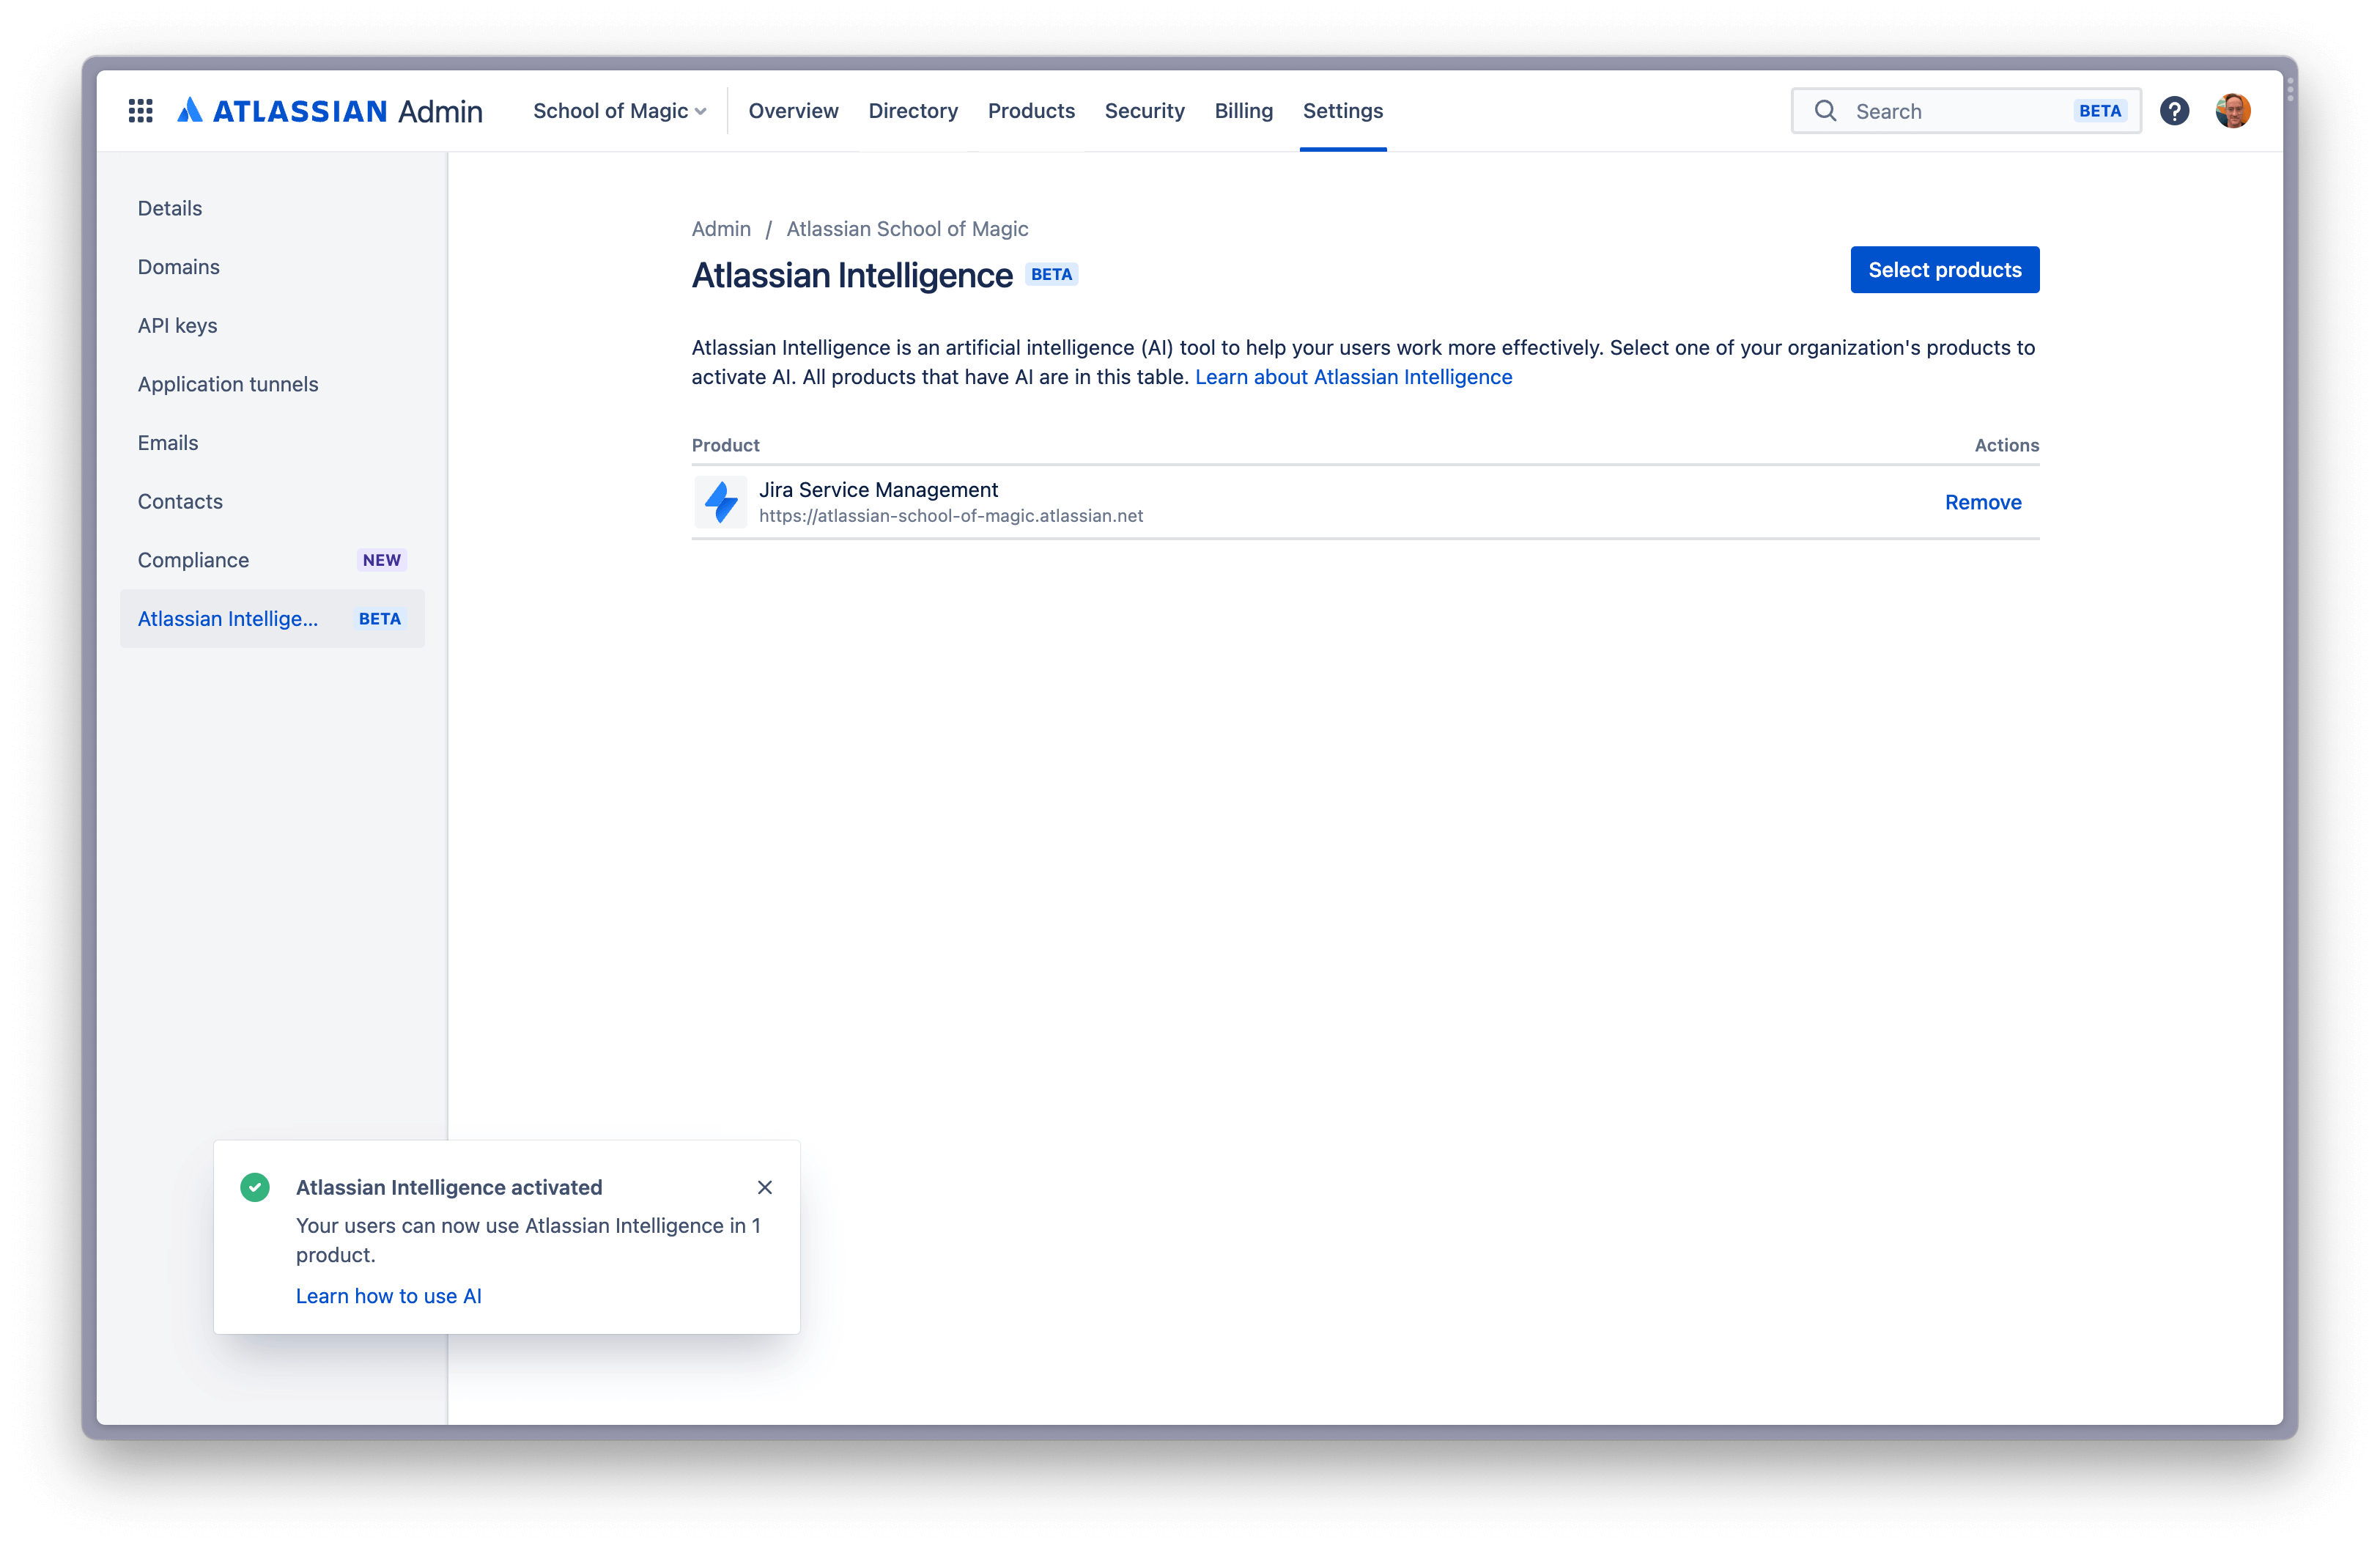 Atlassian Intelligence activated products displayed in Admin Hub